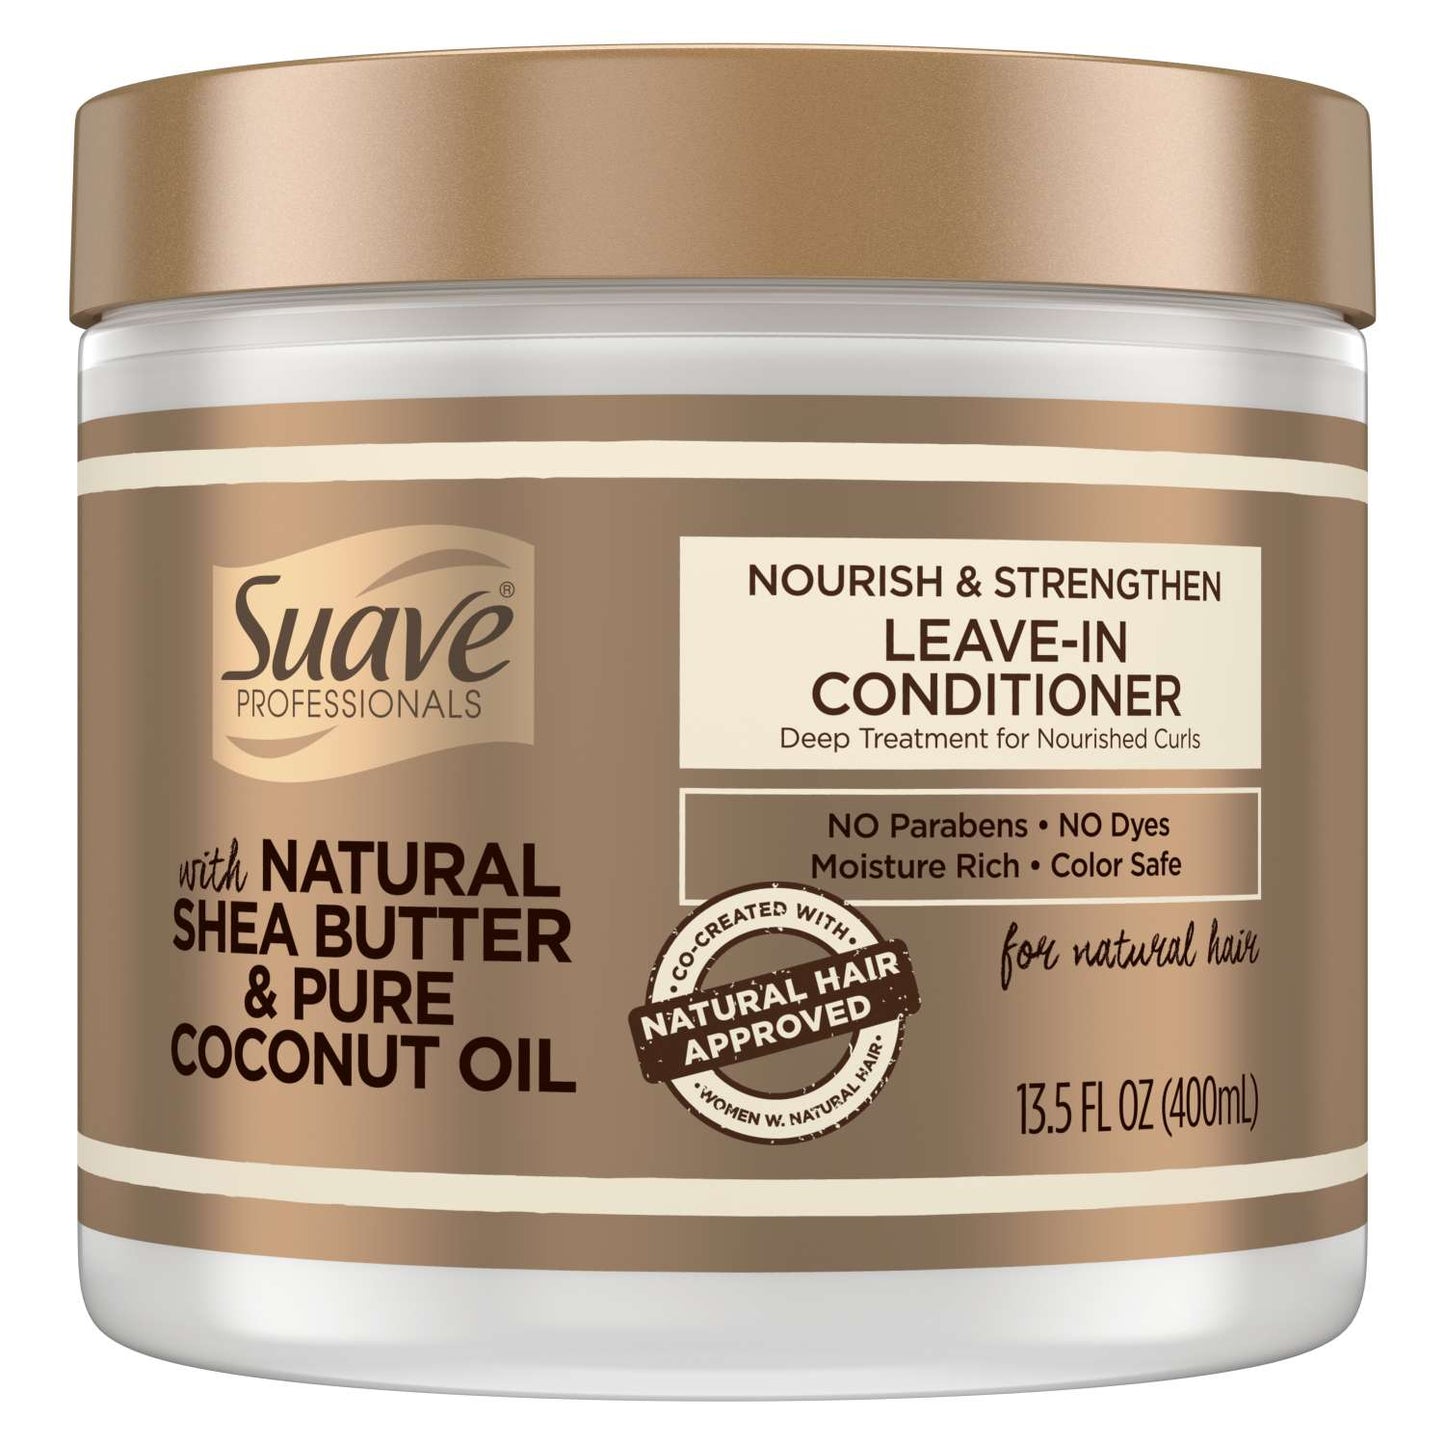 Suave With Natural Shea Butter  Pure Coconut Oil Leave-In Conditioner